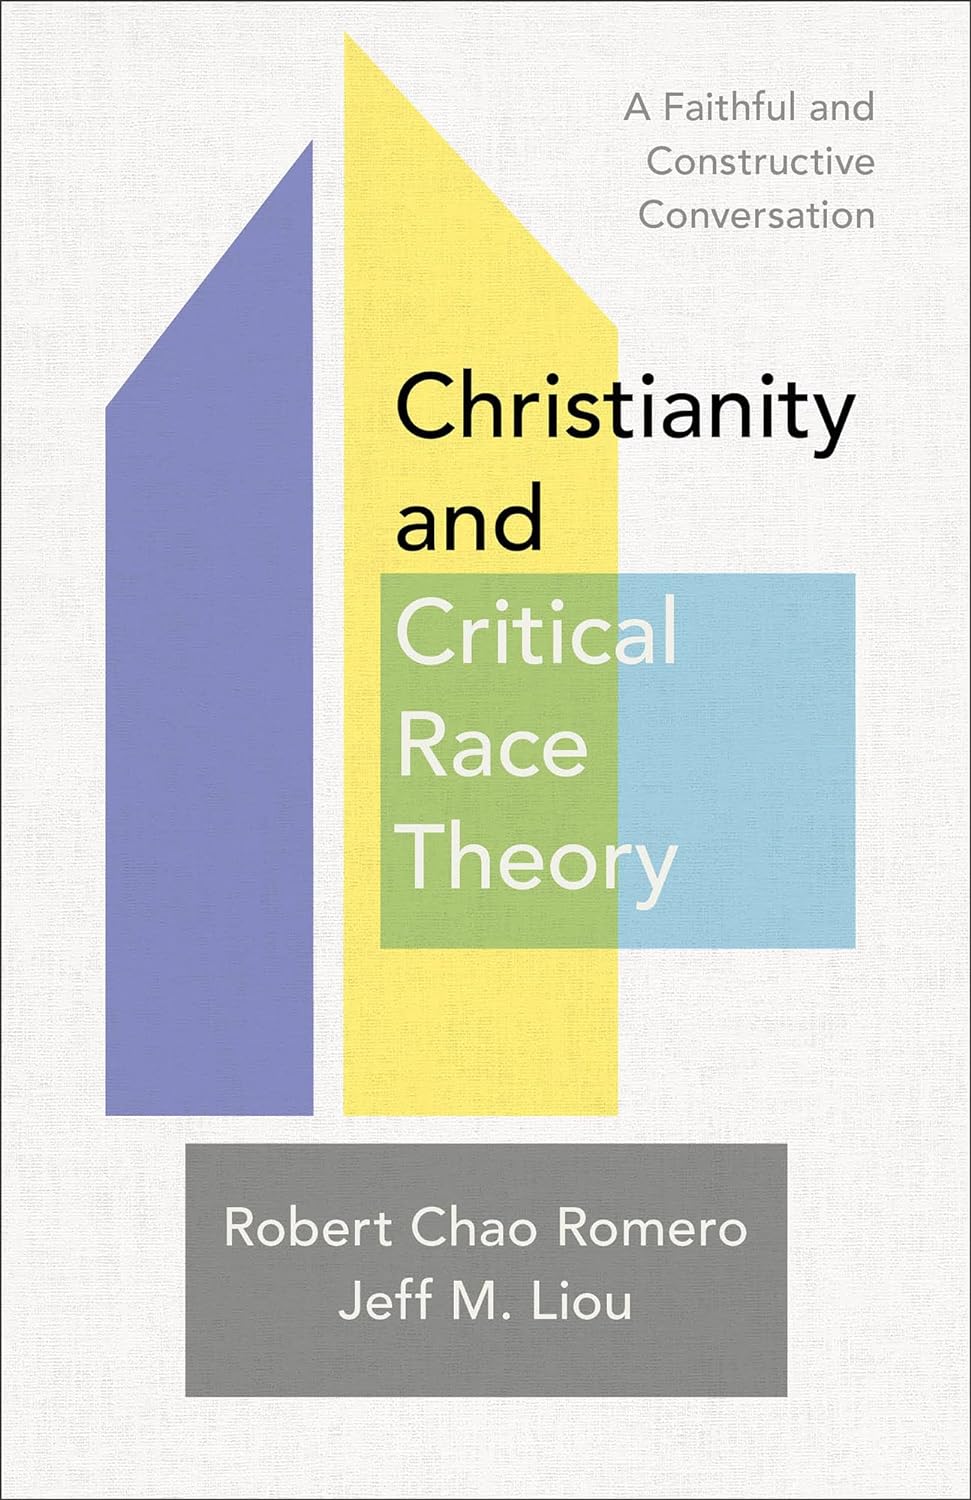 Christianity and Critical Race Theory